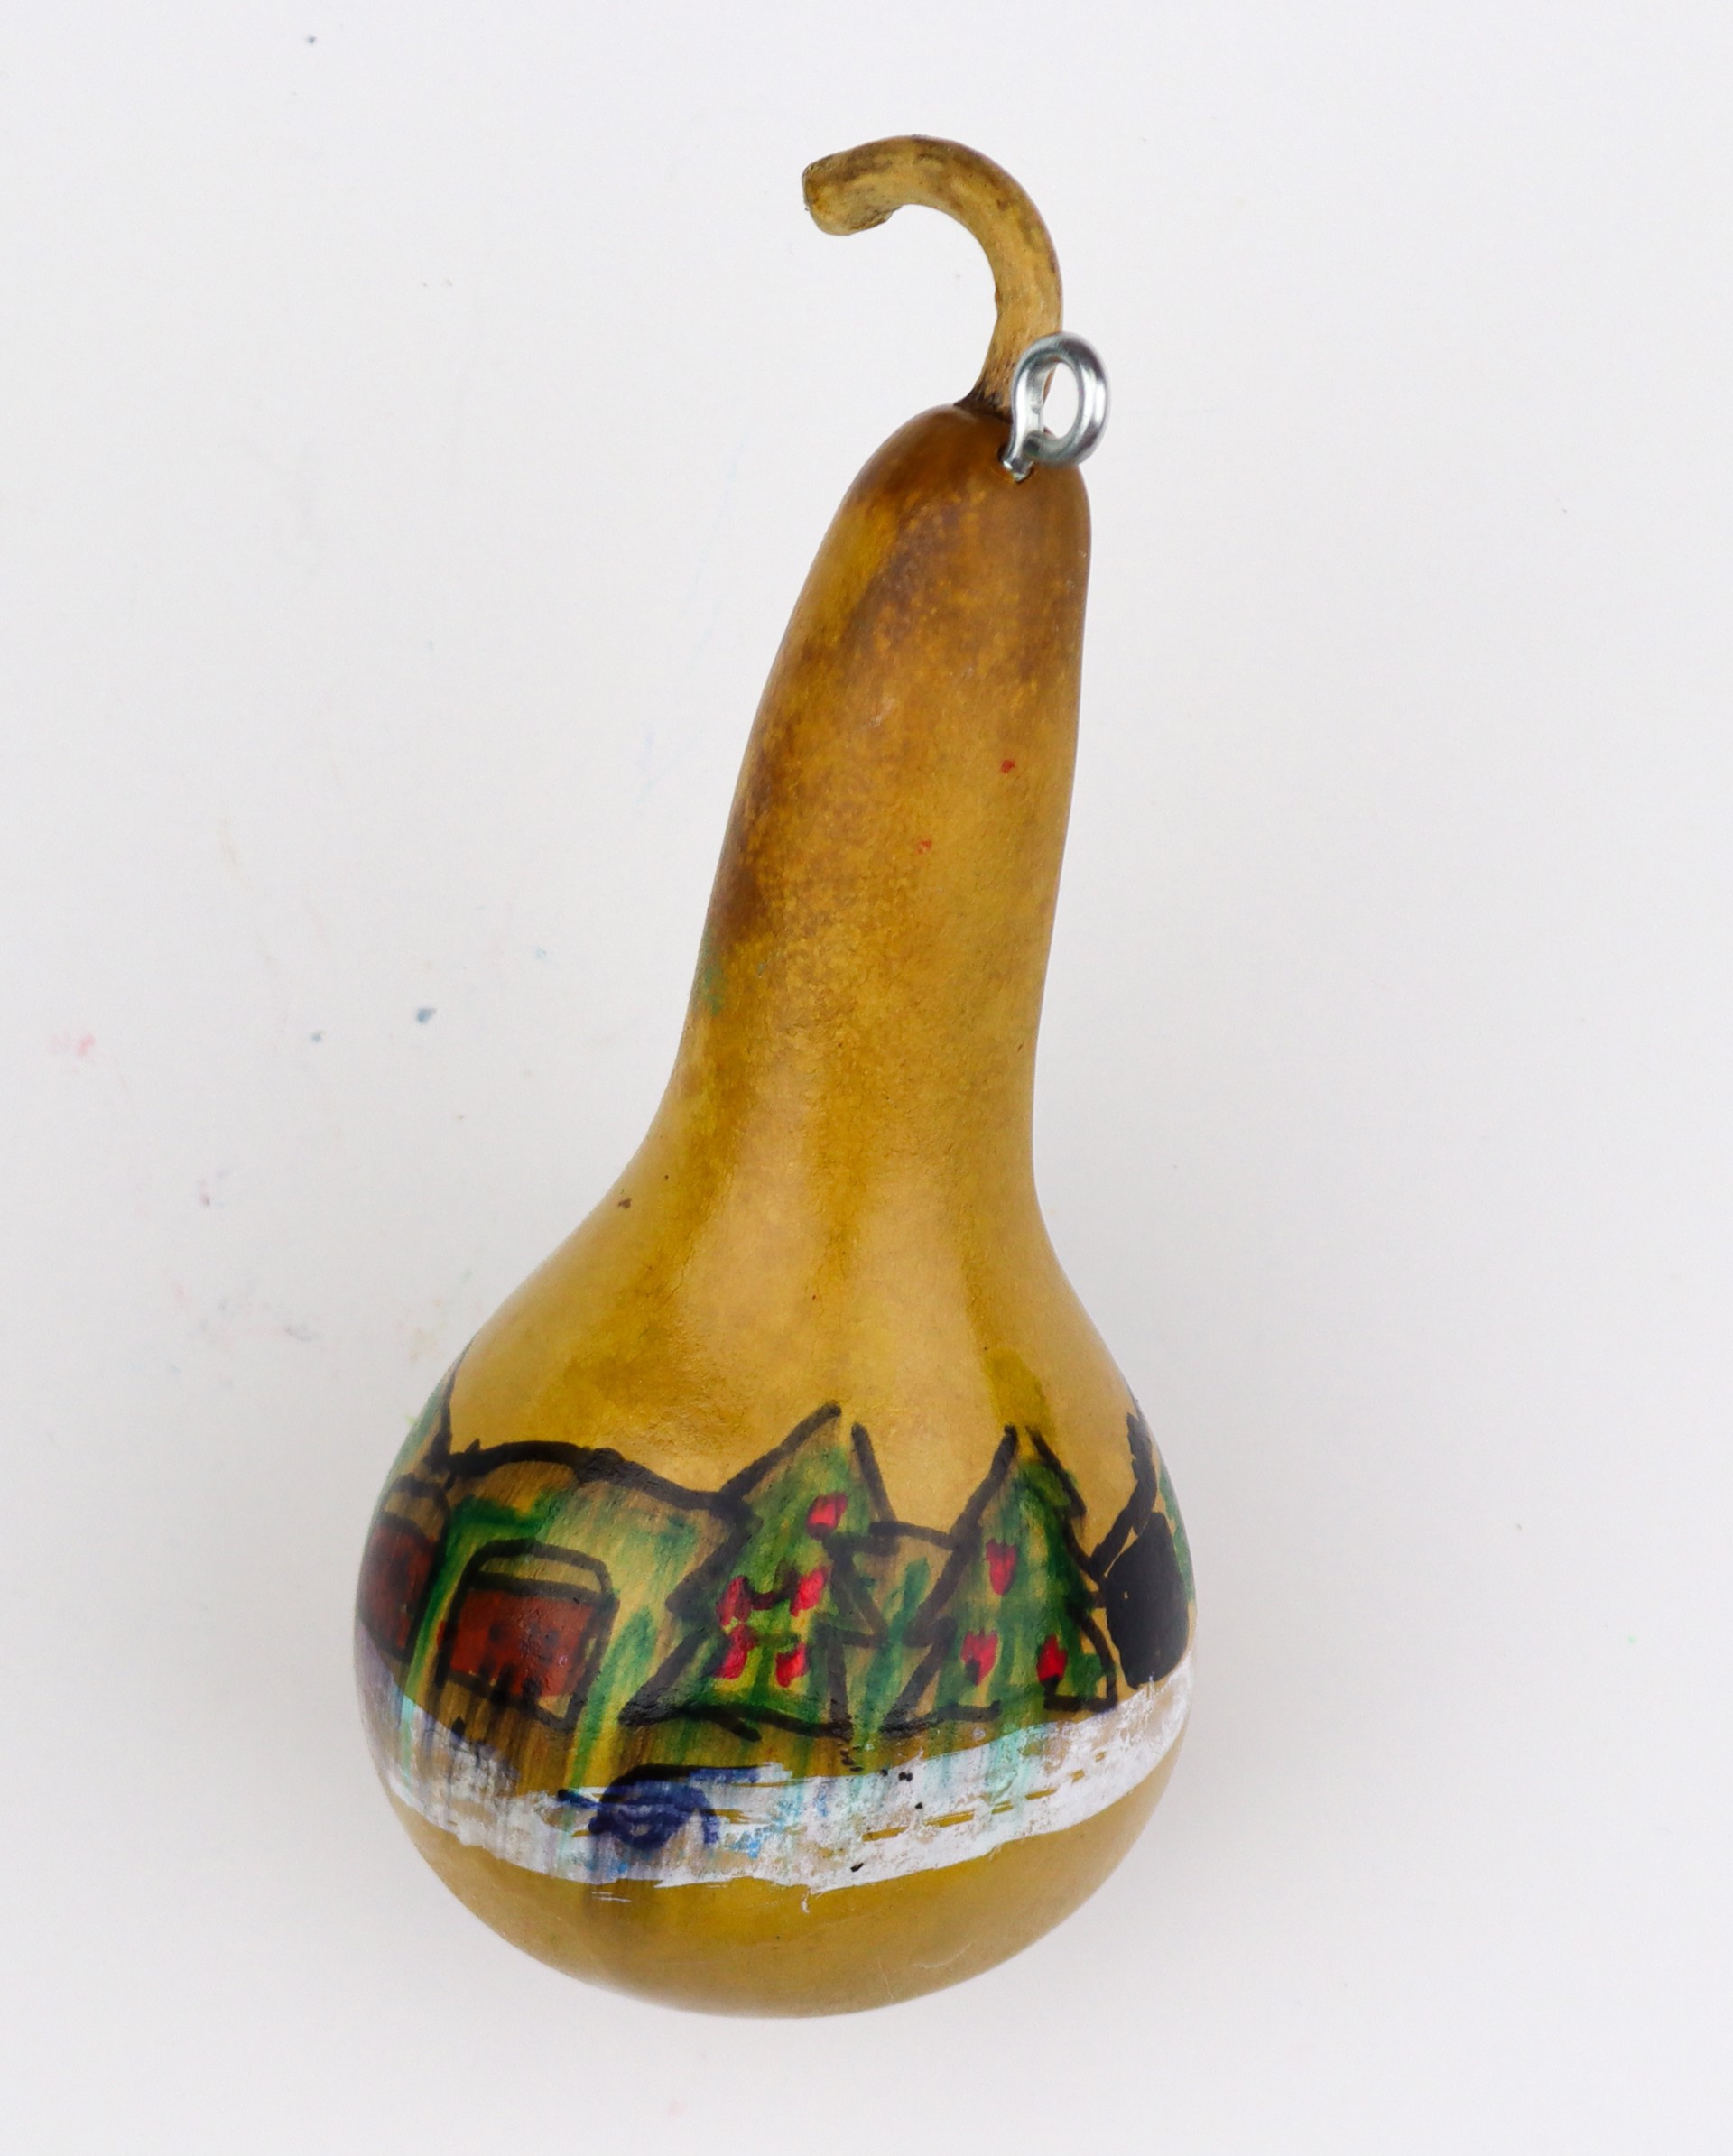 Winter Street (gourd ornament) by Charles Meissner